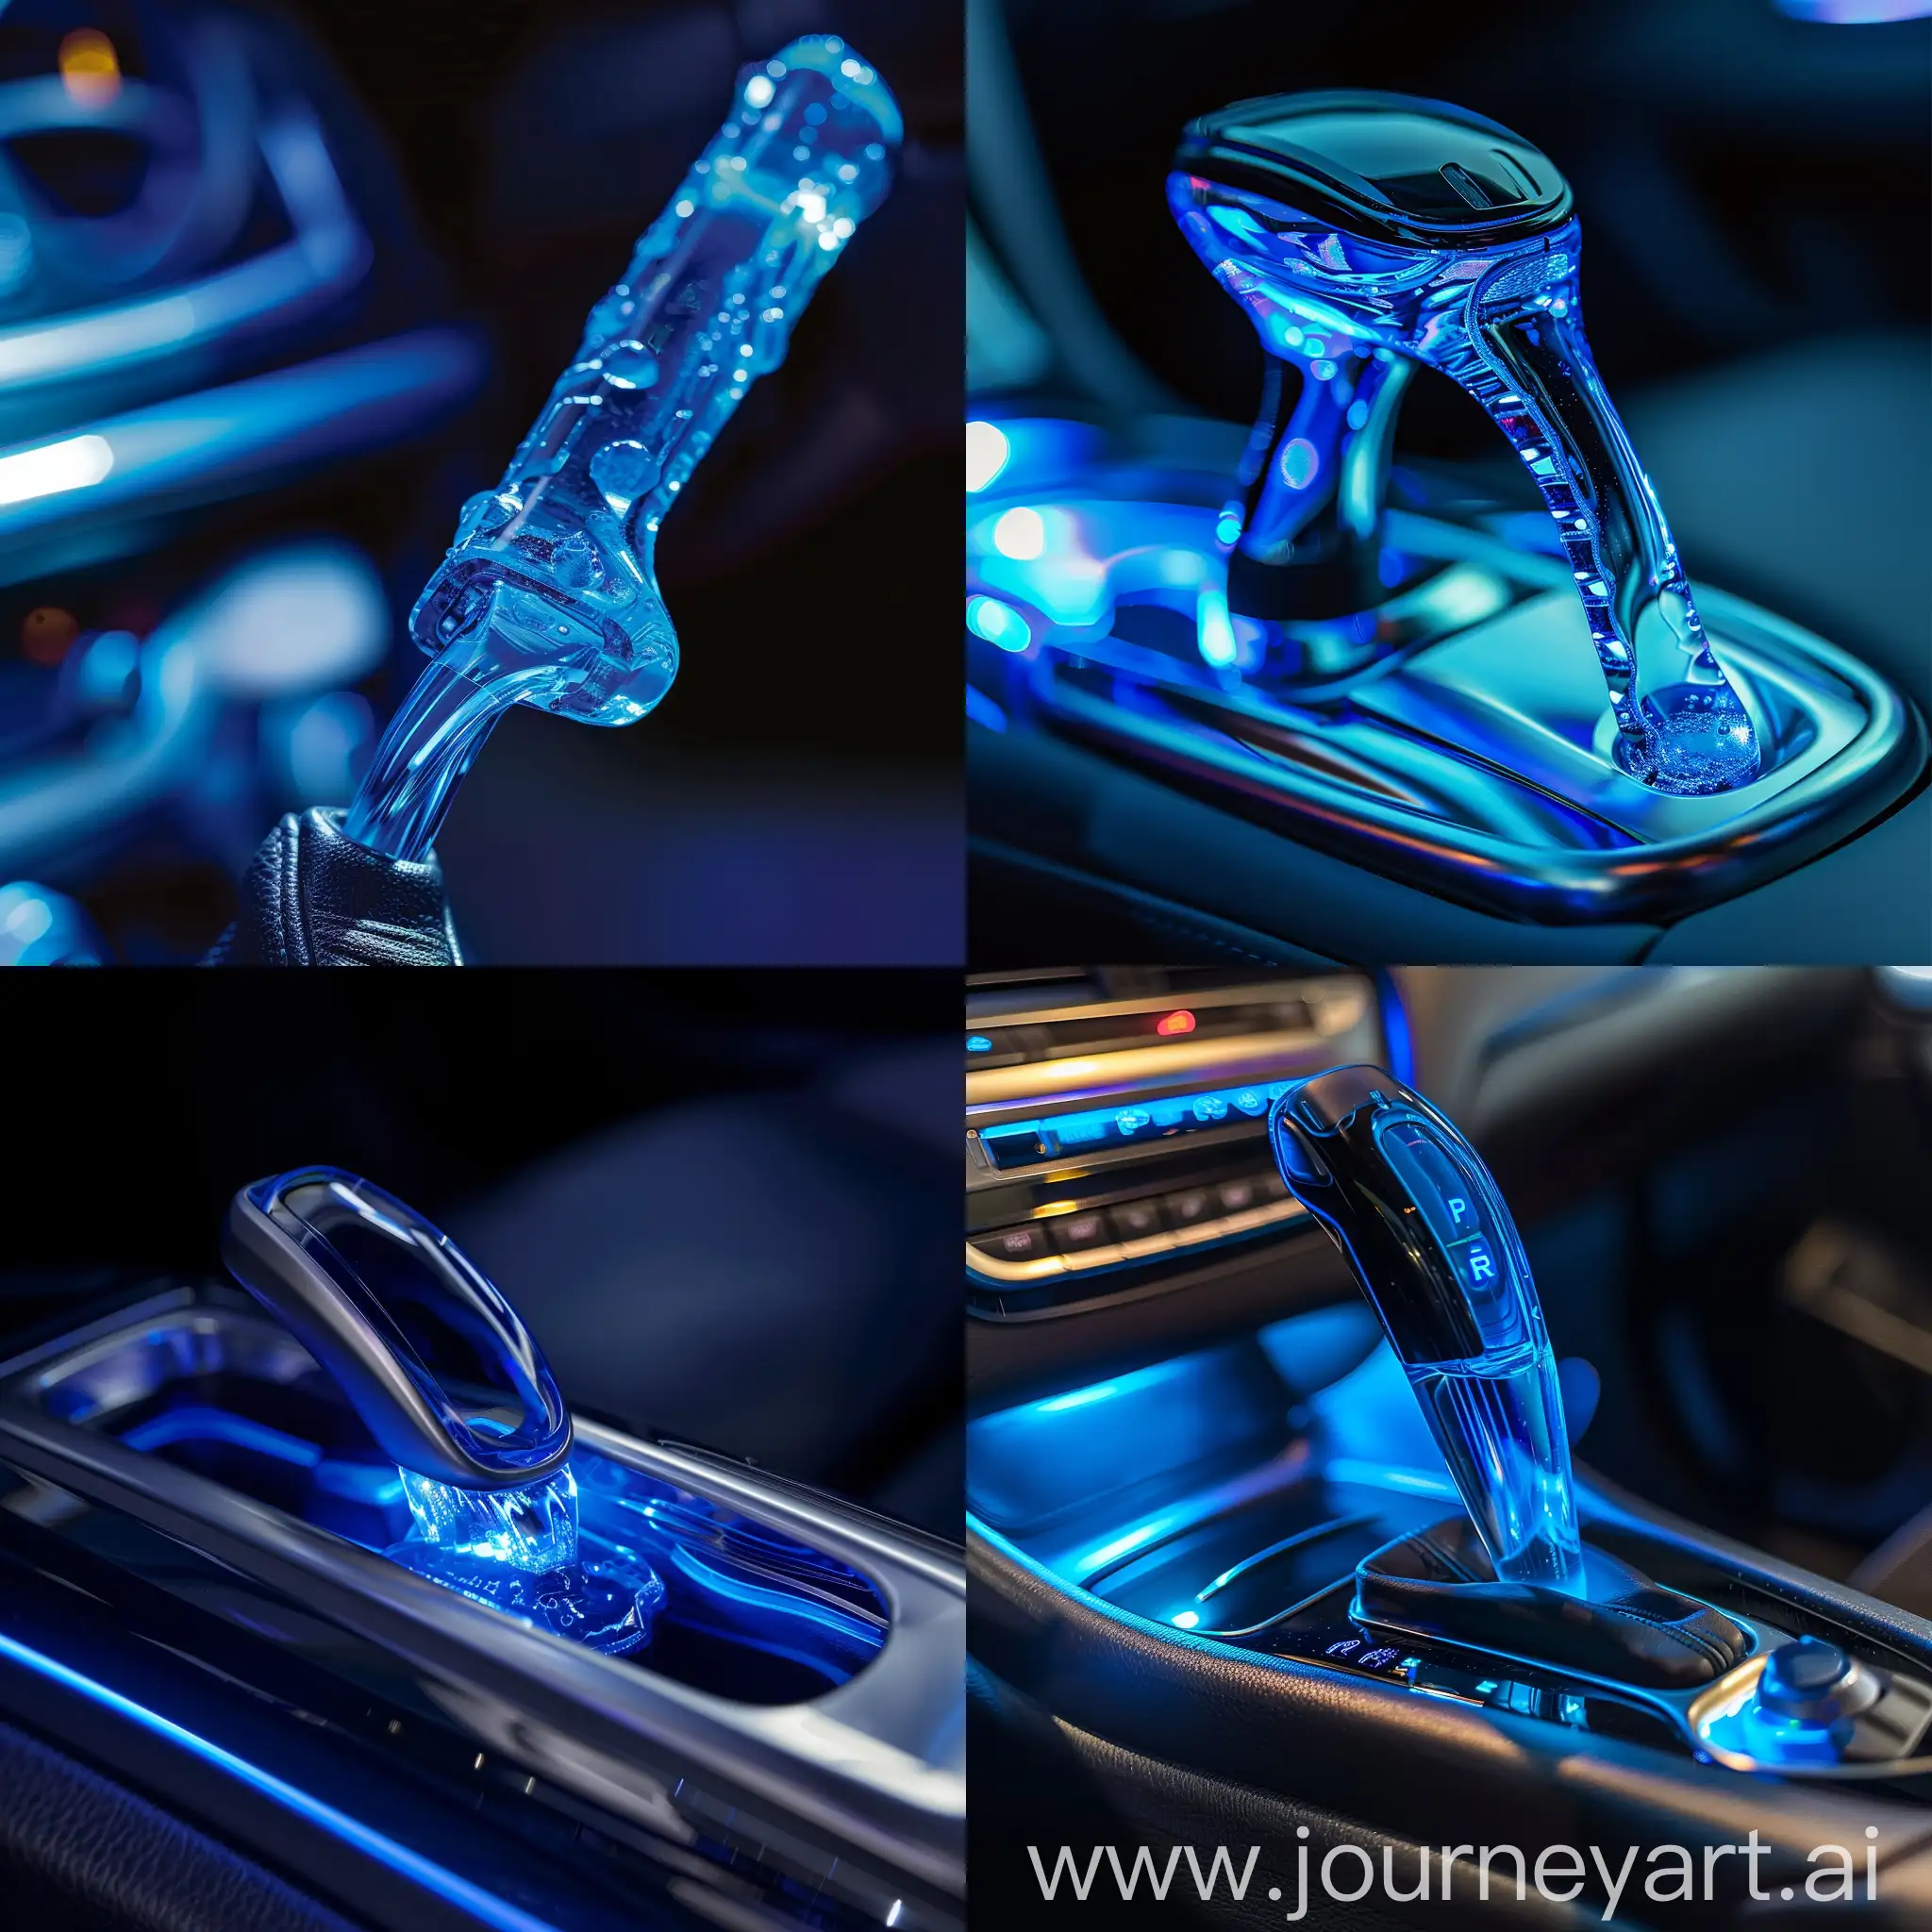 Blue-Car-Lever-with-Fluid-Dripping-Modern-Automotive-Engineering-Concept